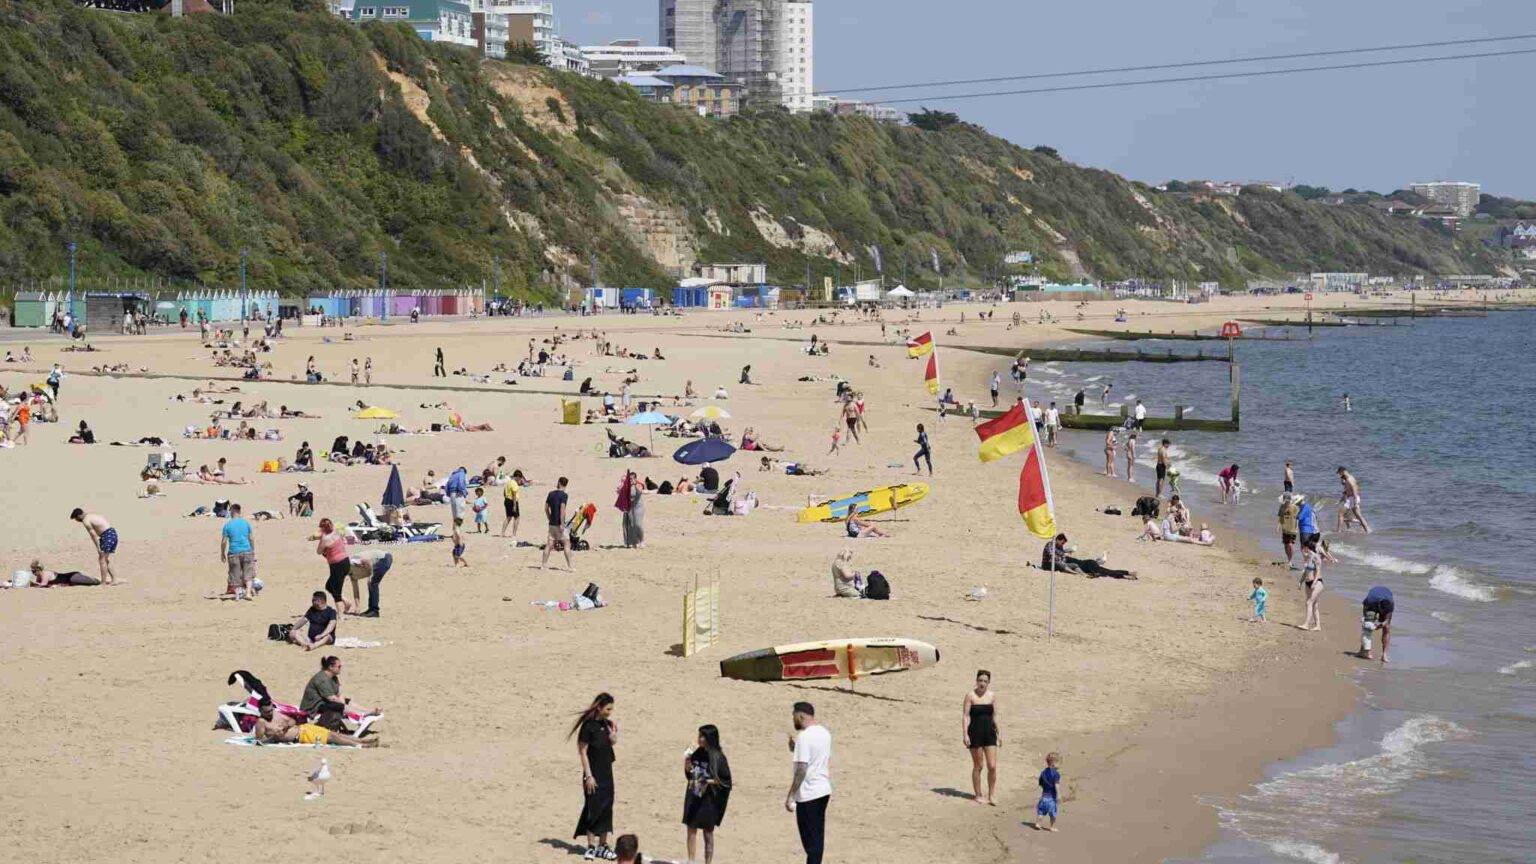 Bank holiday weekend forecast to bring UK’s hottest day of year so far